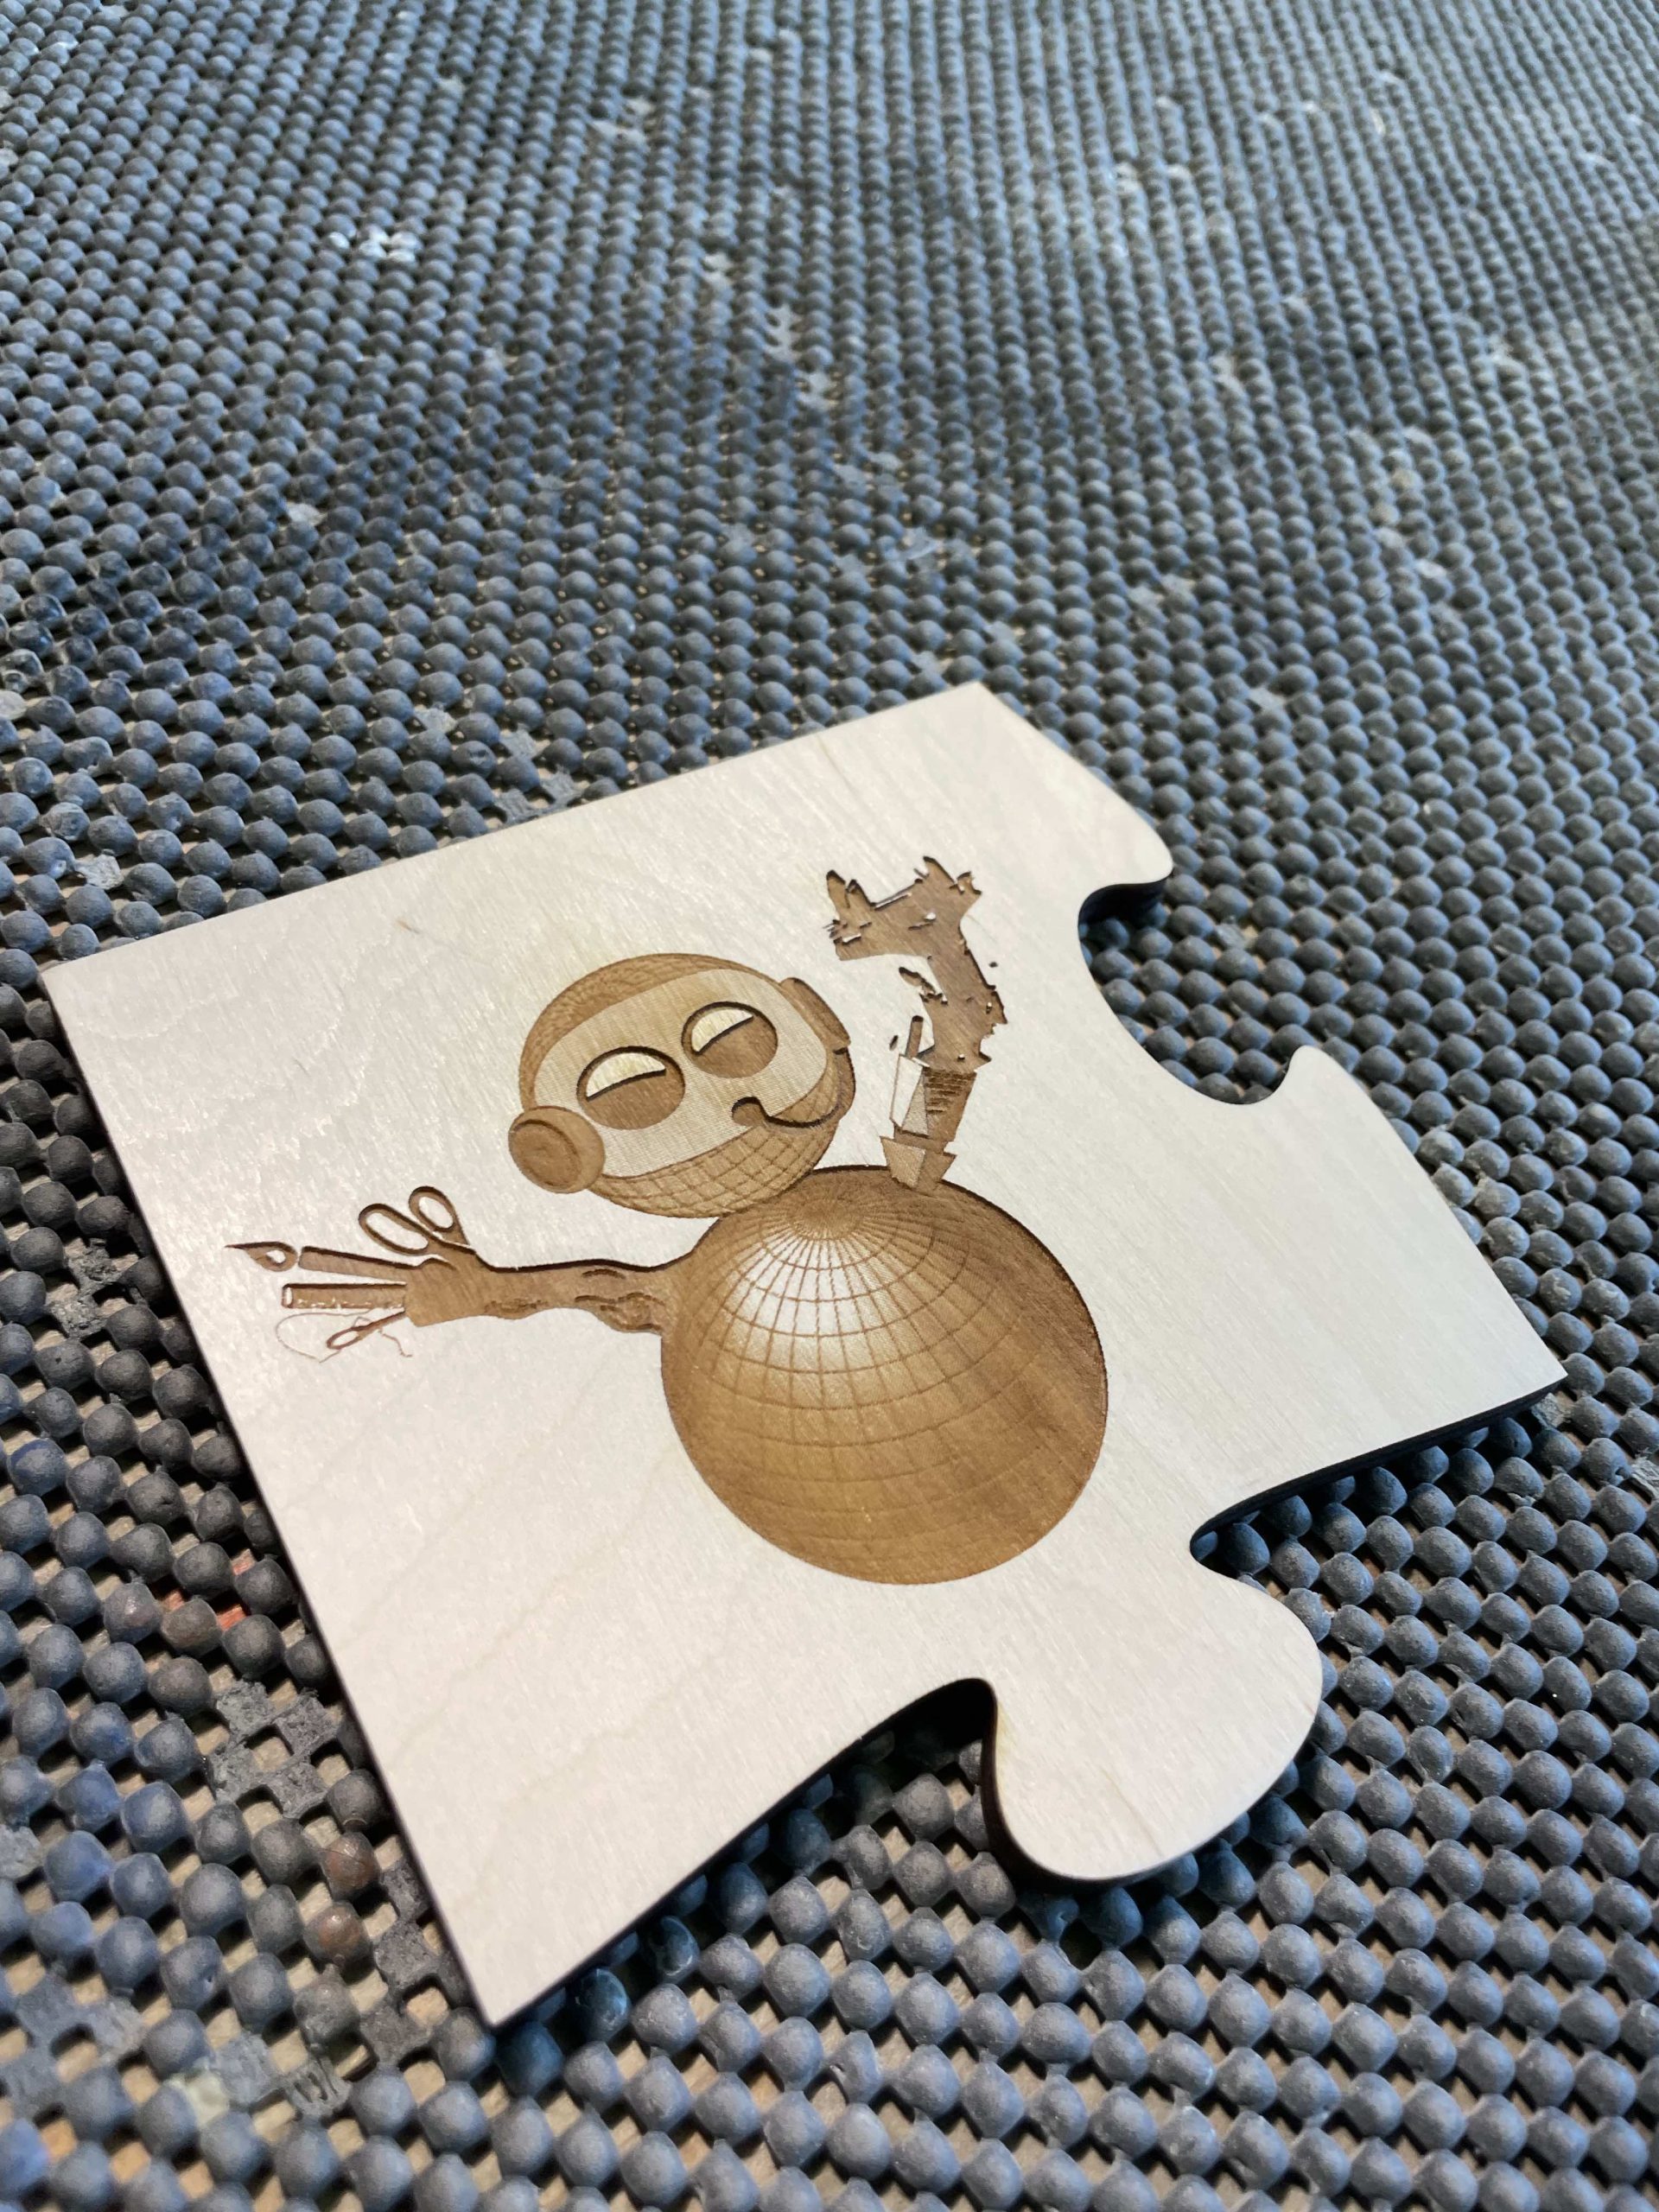 Art of MRC (pronounced Mercy) Robot cut into wood puzzle pieces by the IMRC Center Universal Laser